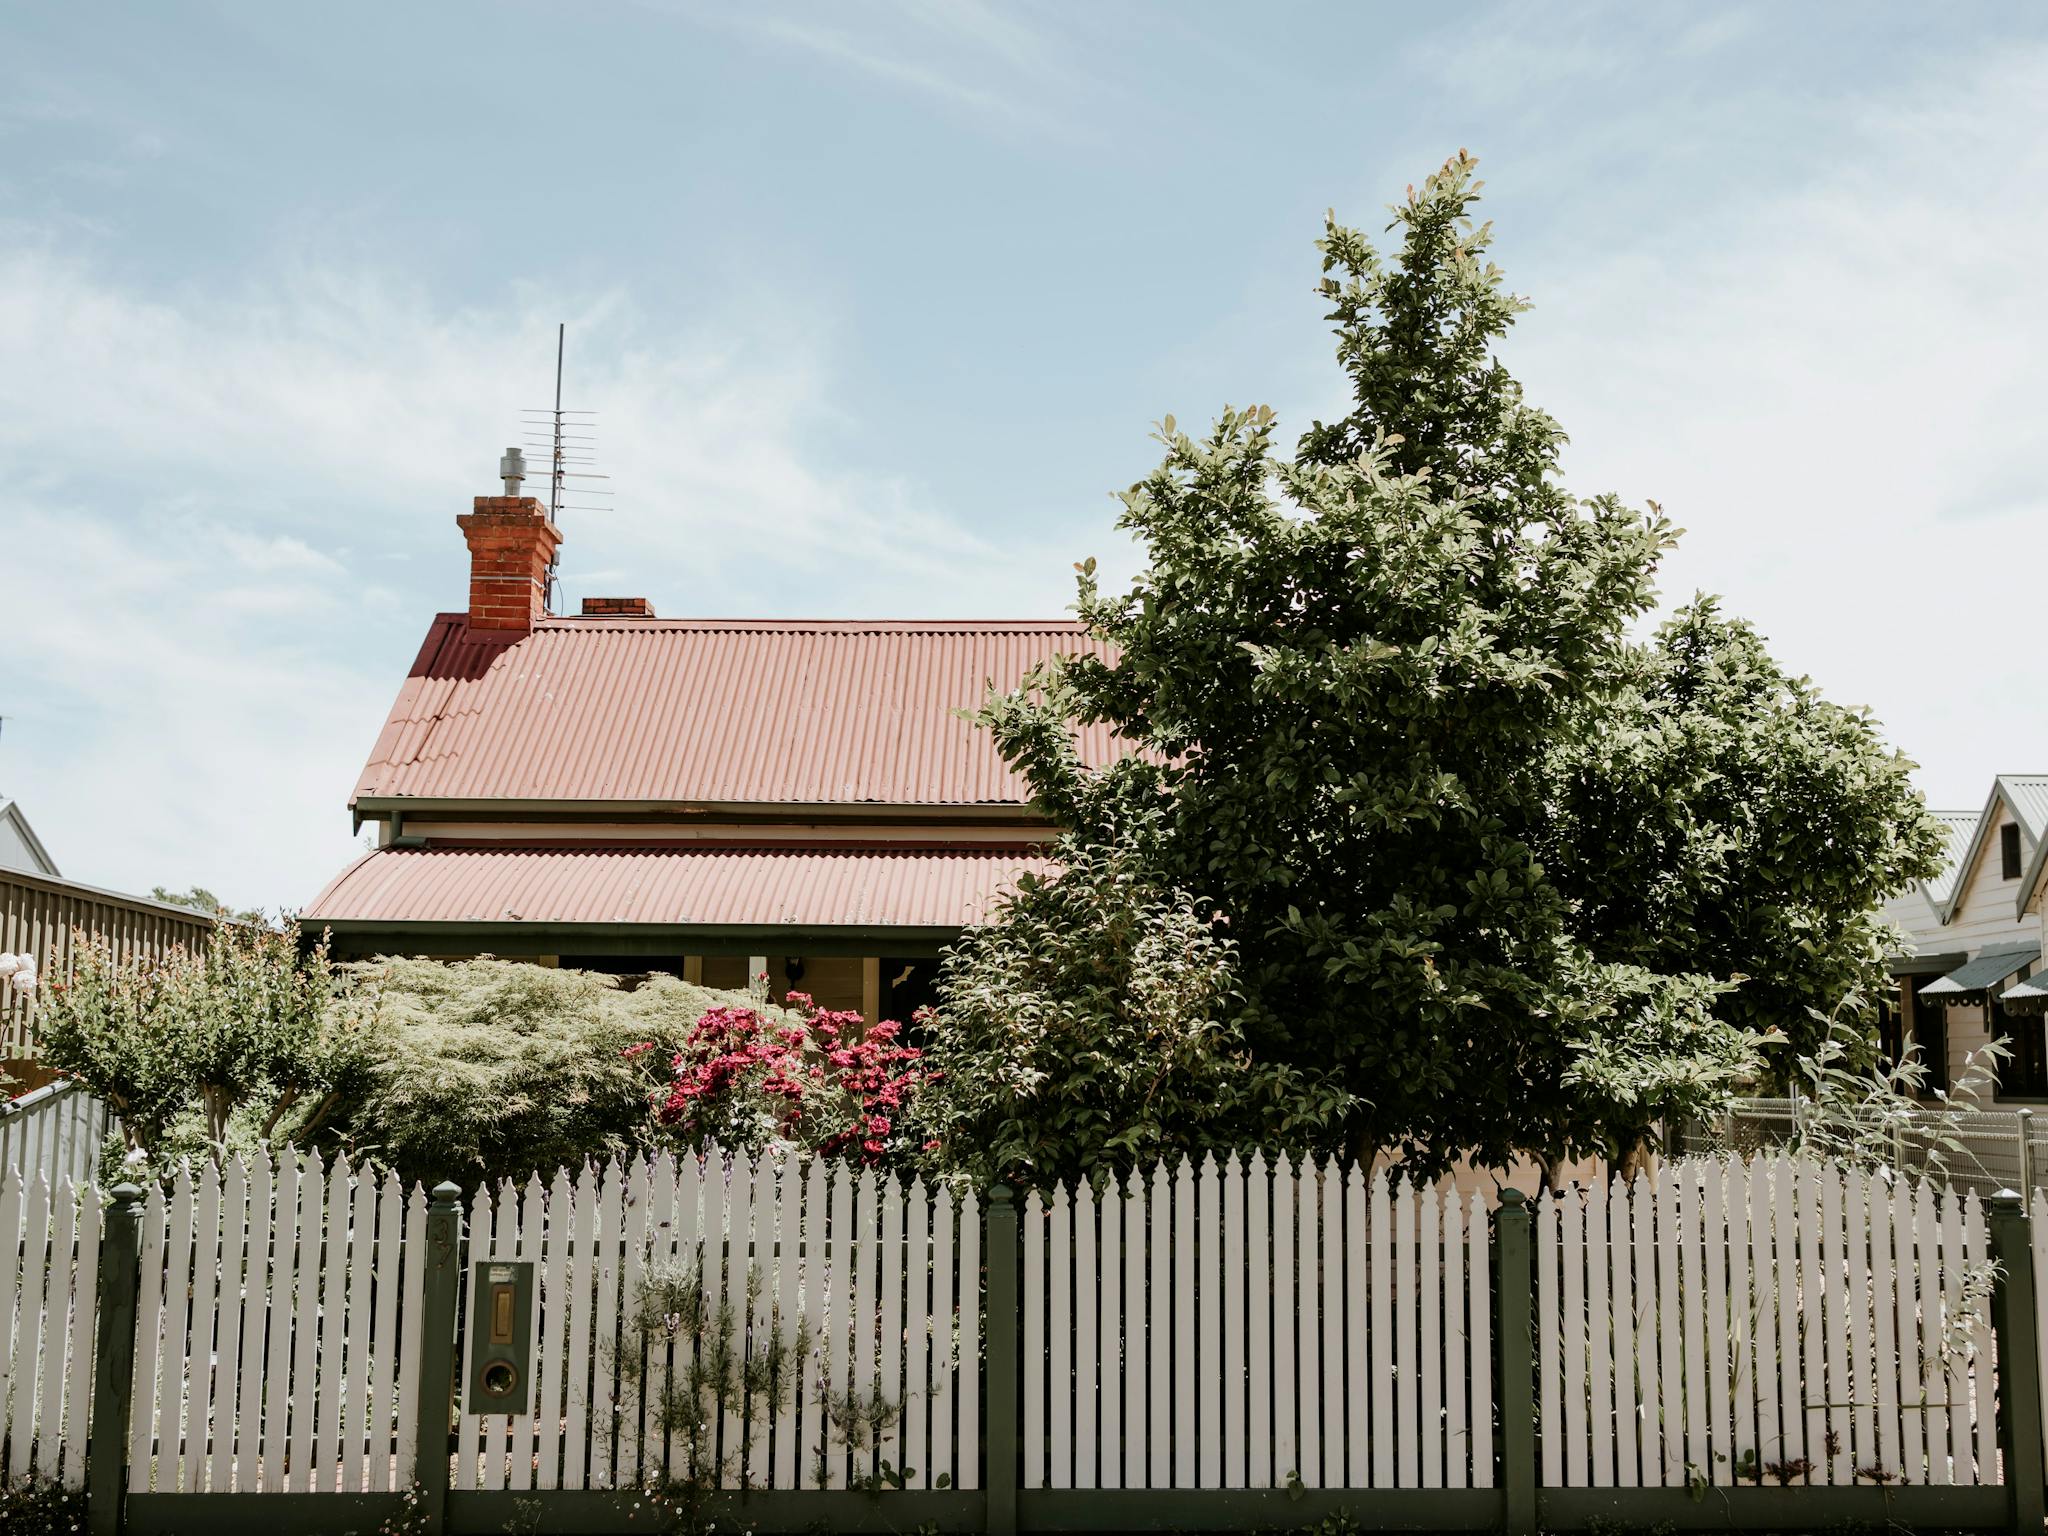 The Cottage on Gray is conveniently located in central Wangaratta, walking distance to local cafes